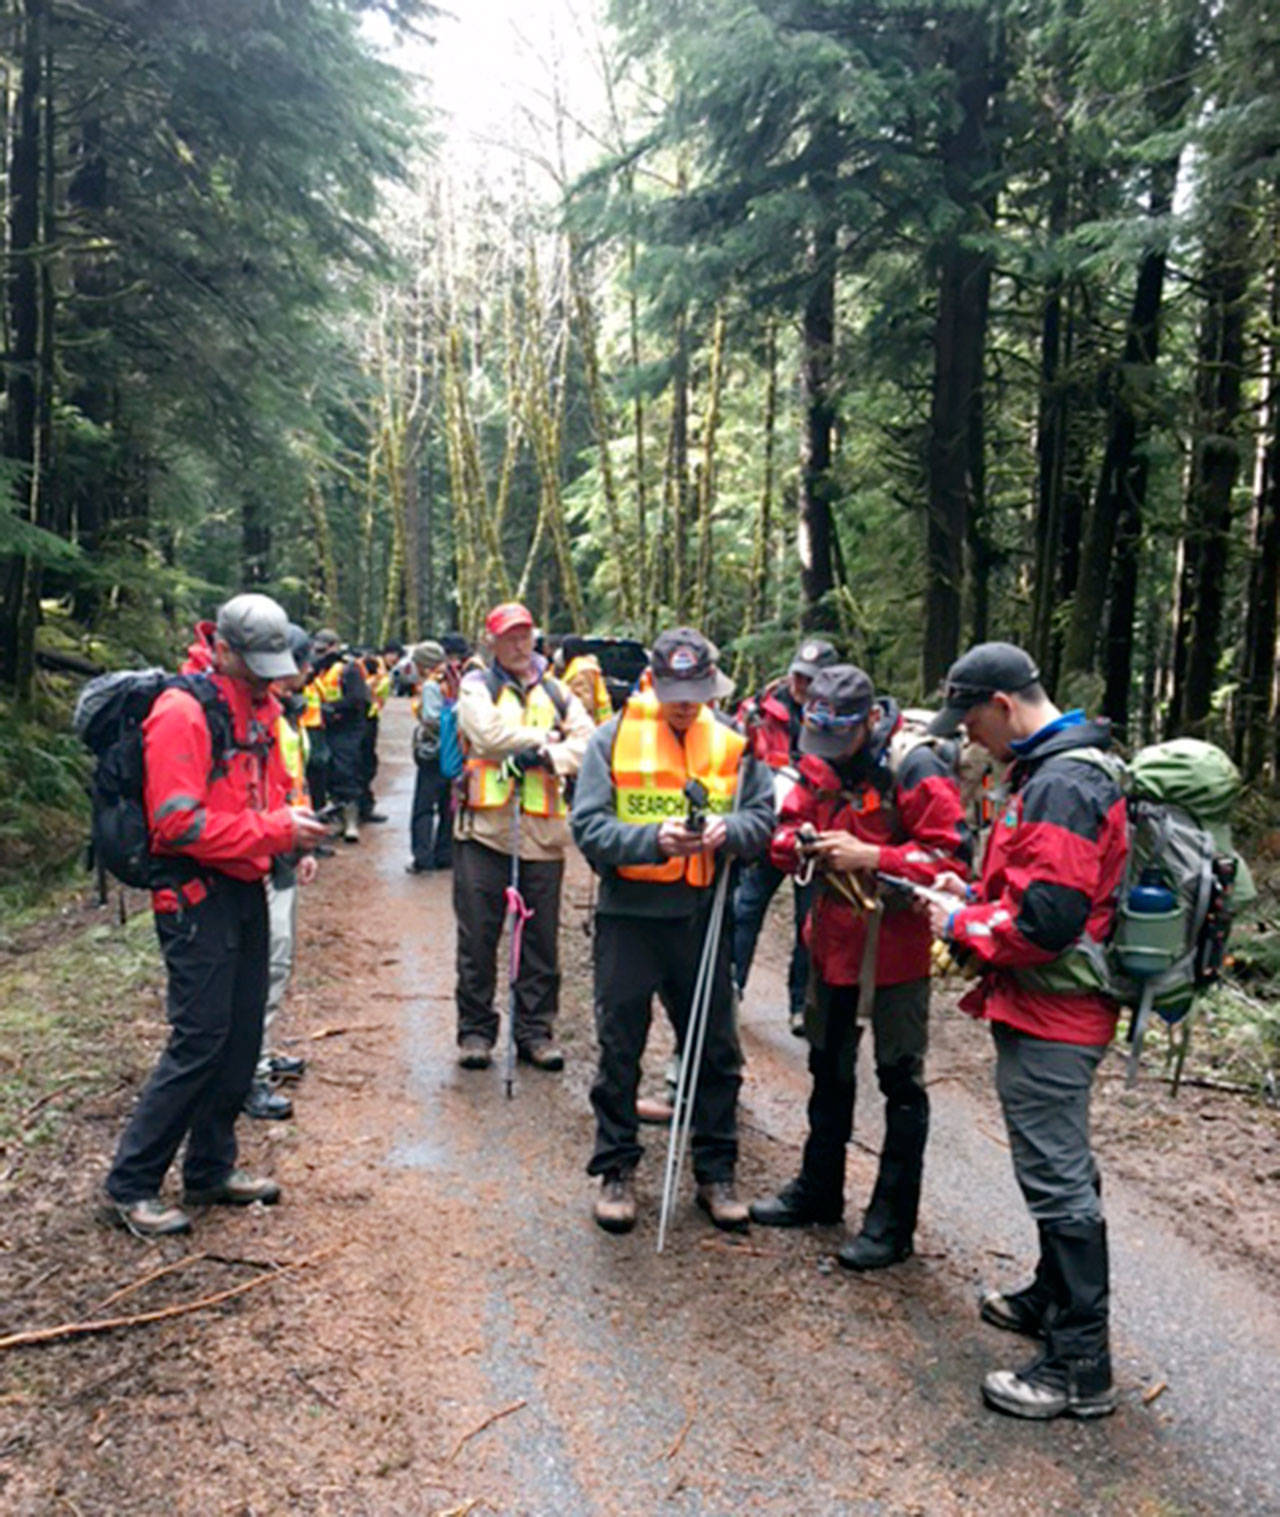 The Clallam County Sheriff’s Office search and rescue team and volunteers prepared to look for missing camper Jacob Gray on Saturday. (Clallam County Sheriff’s Office)